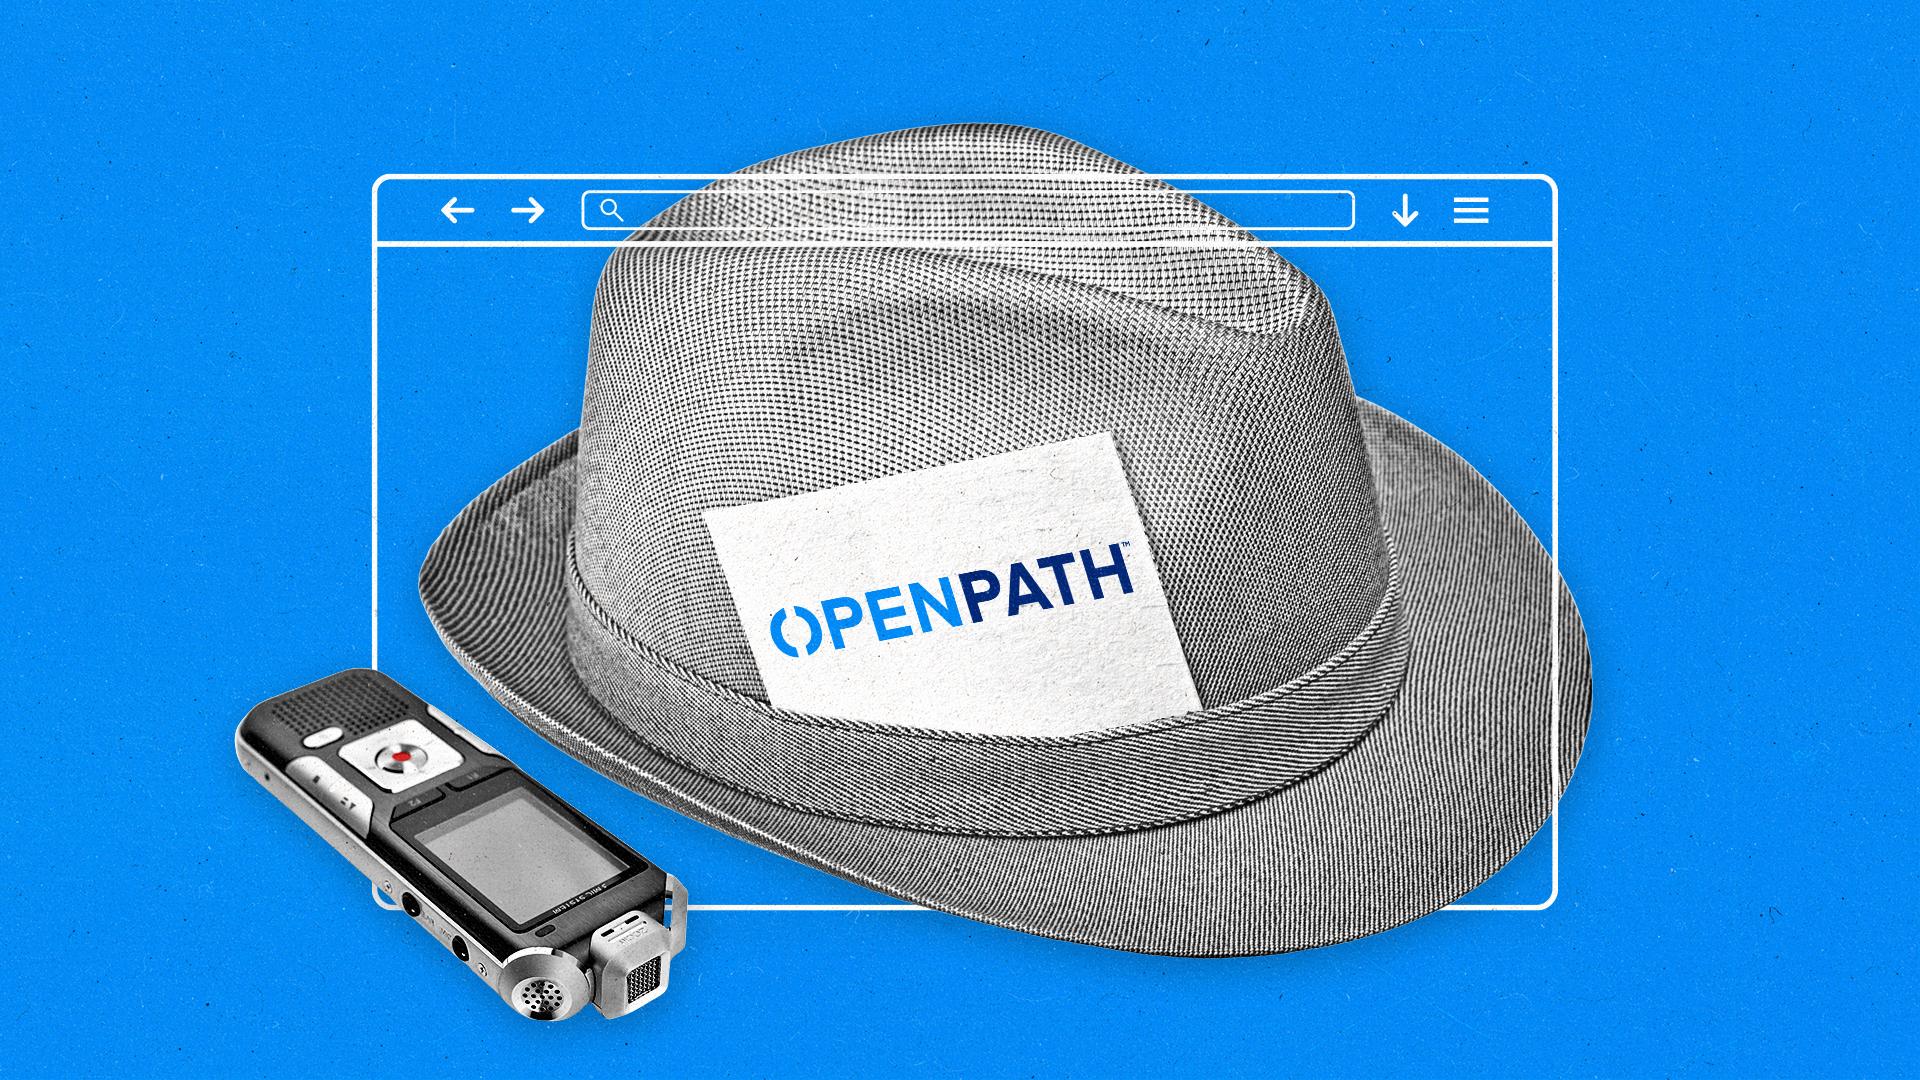 BuzzFeed, Forbes, the LA Times just adopted OpenPath. Here’s why the tech product is poised to become the next major innovation in programmatic advertising.